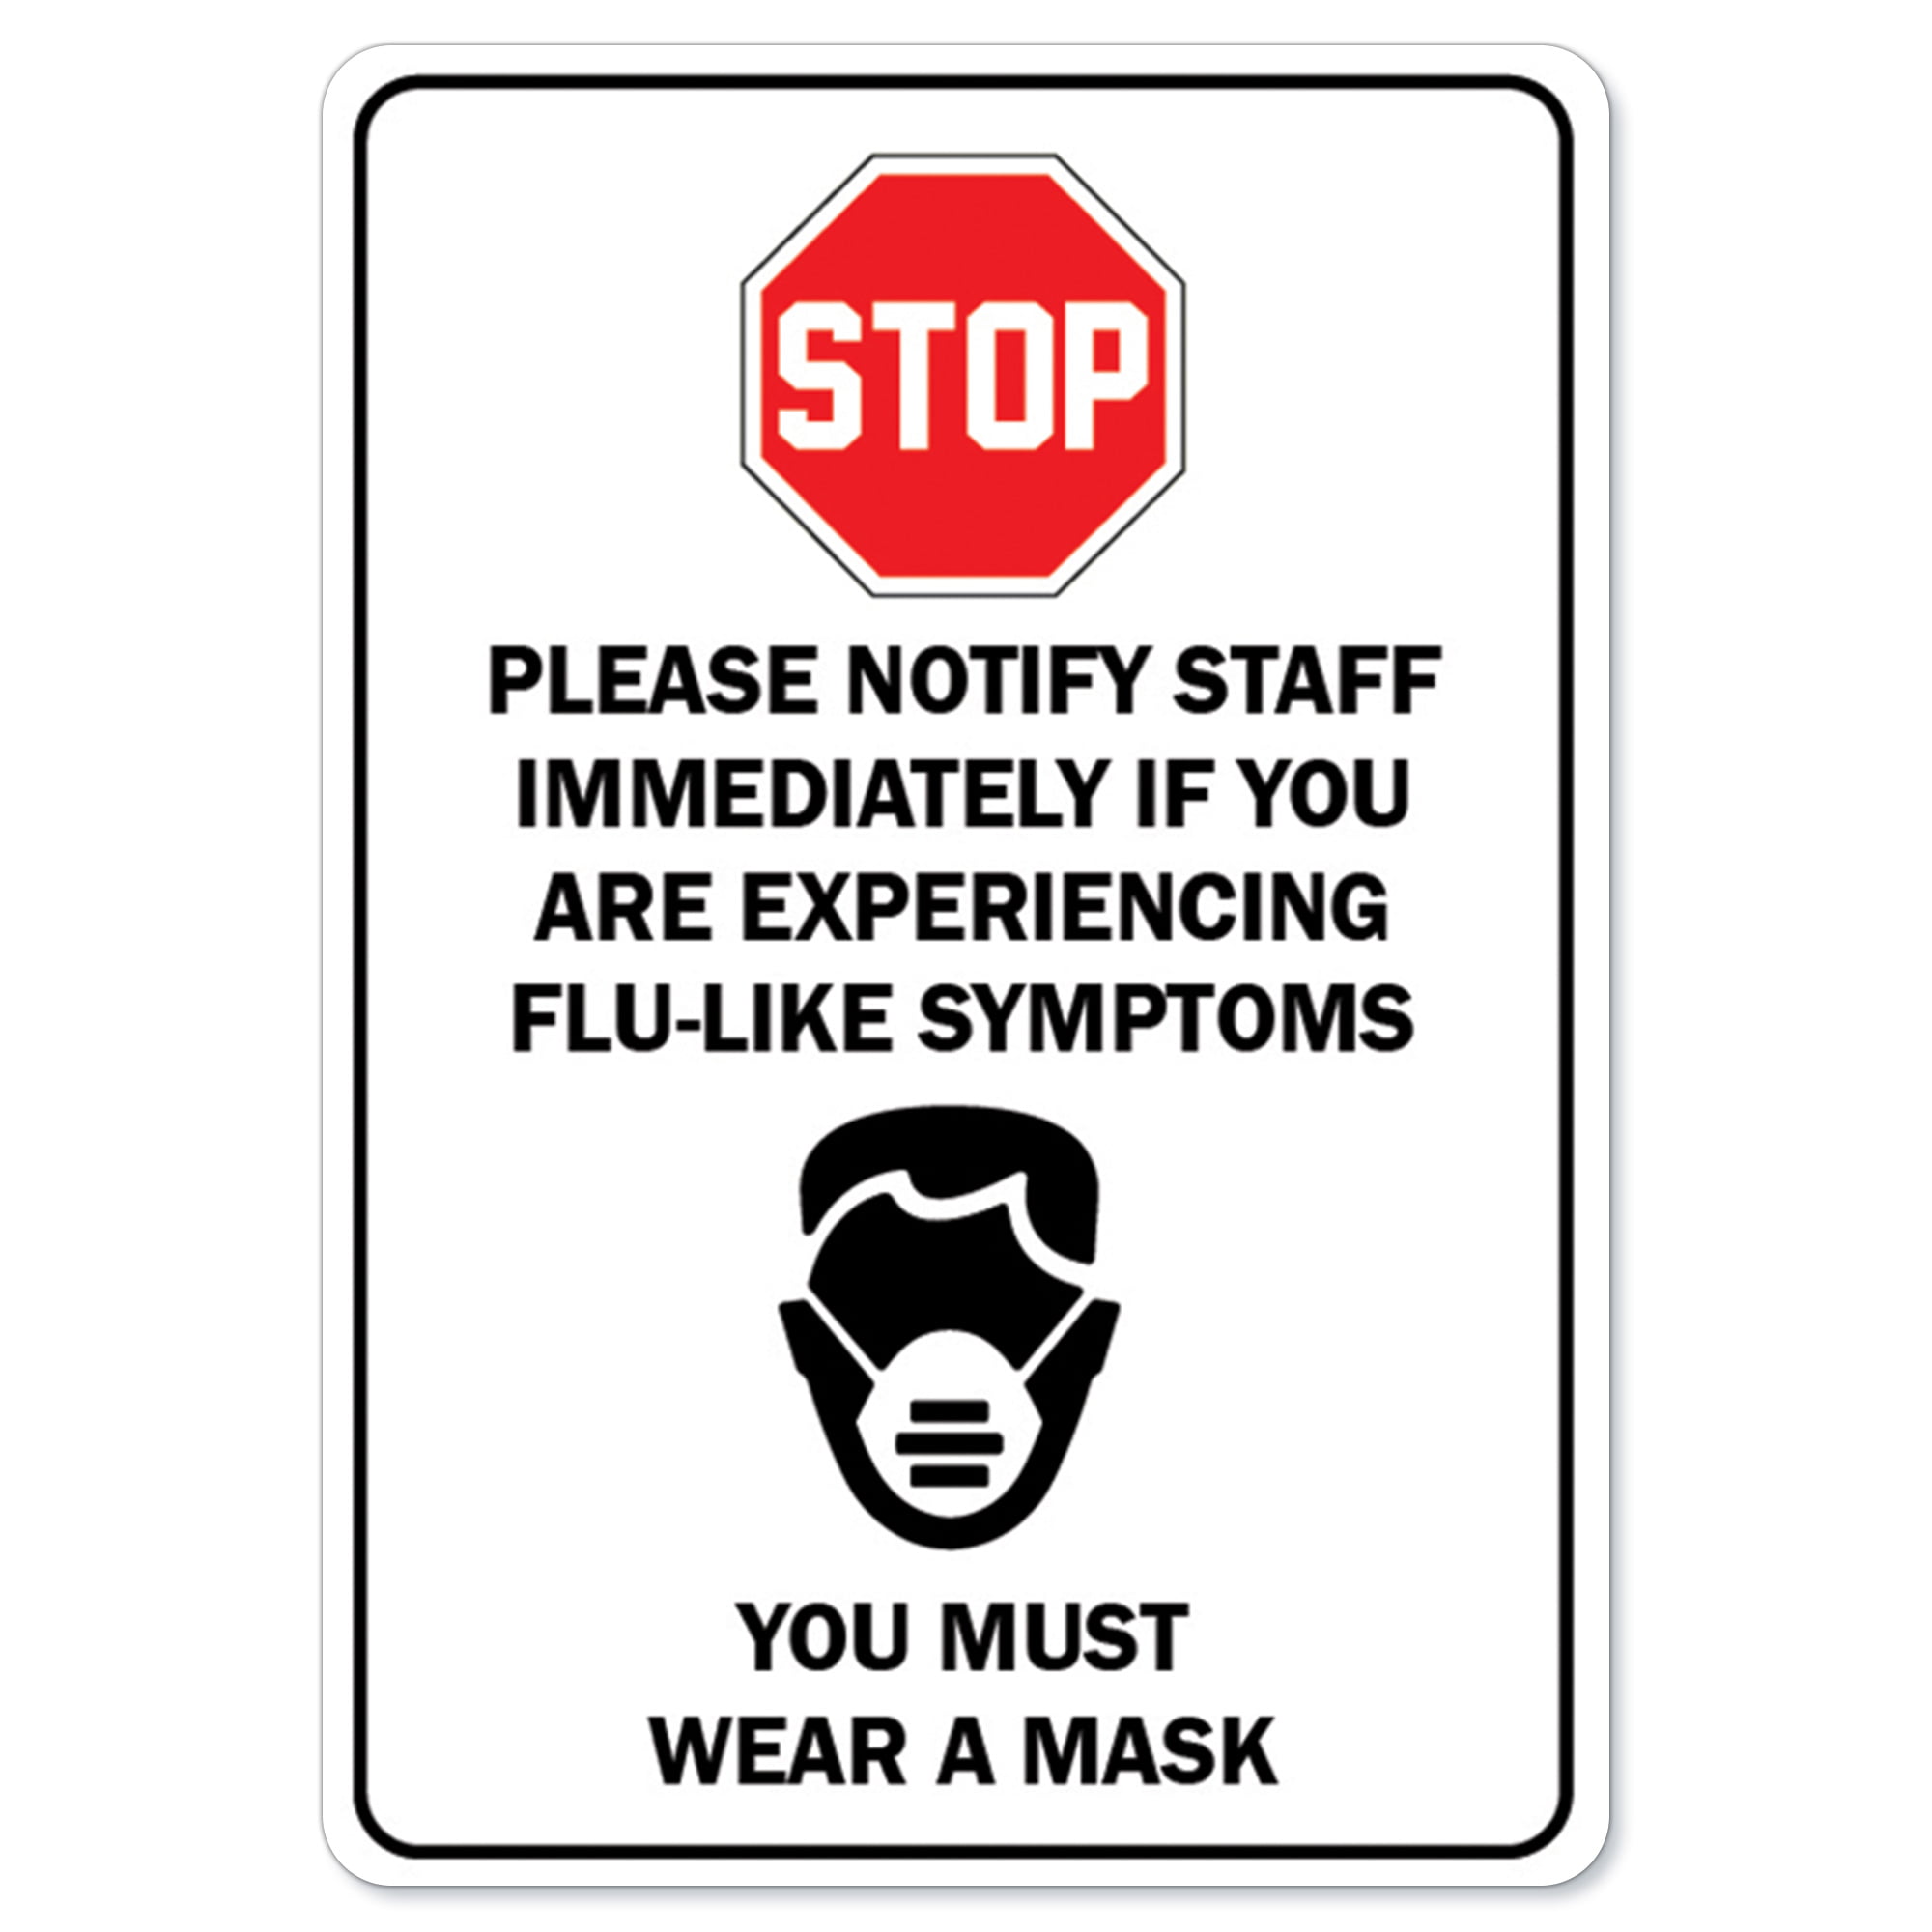 ComplianceSigns Vinyl ANSI DANGER Label with Space Constraints... 10 x 7 in 